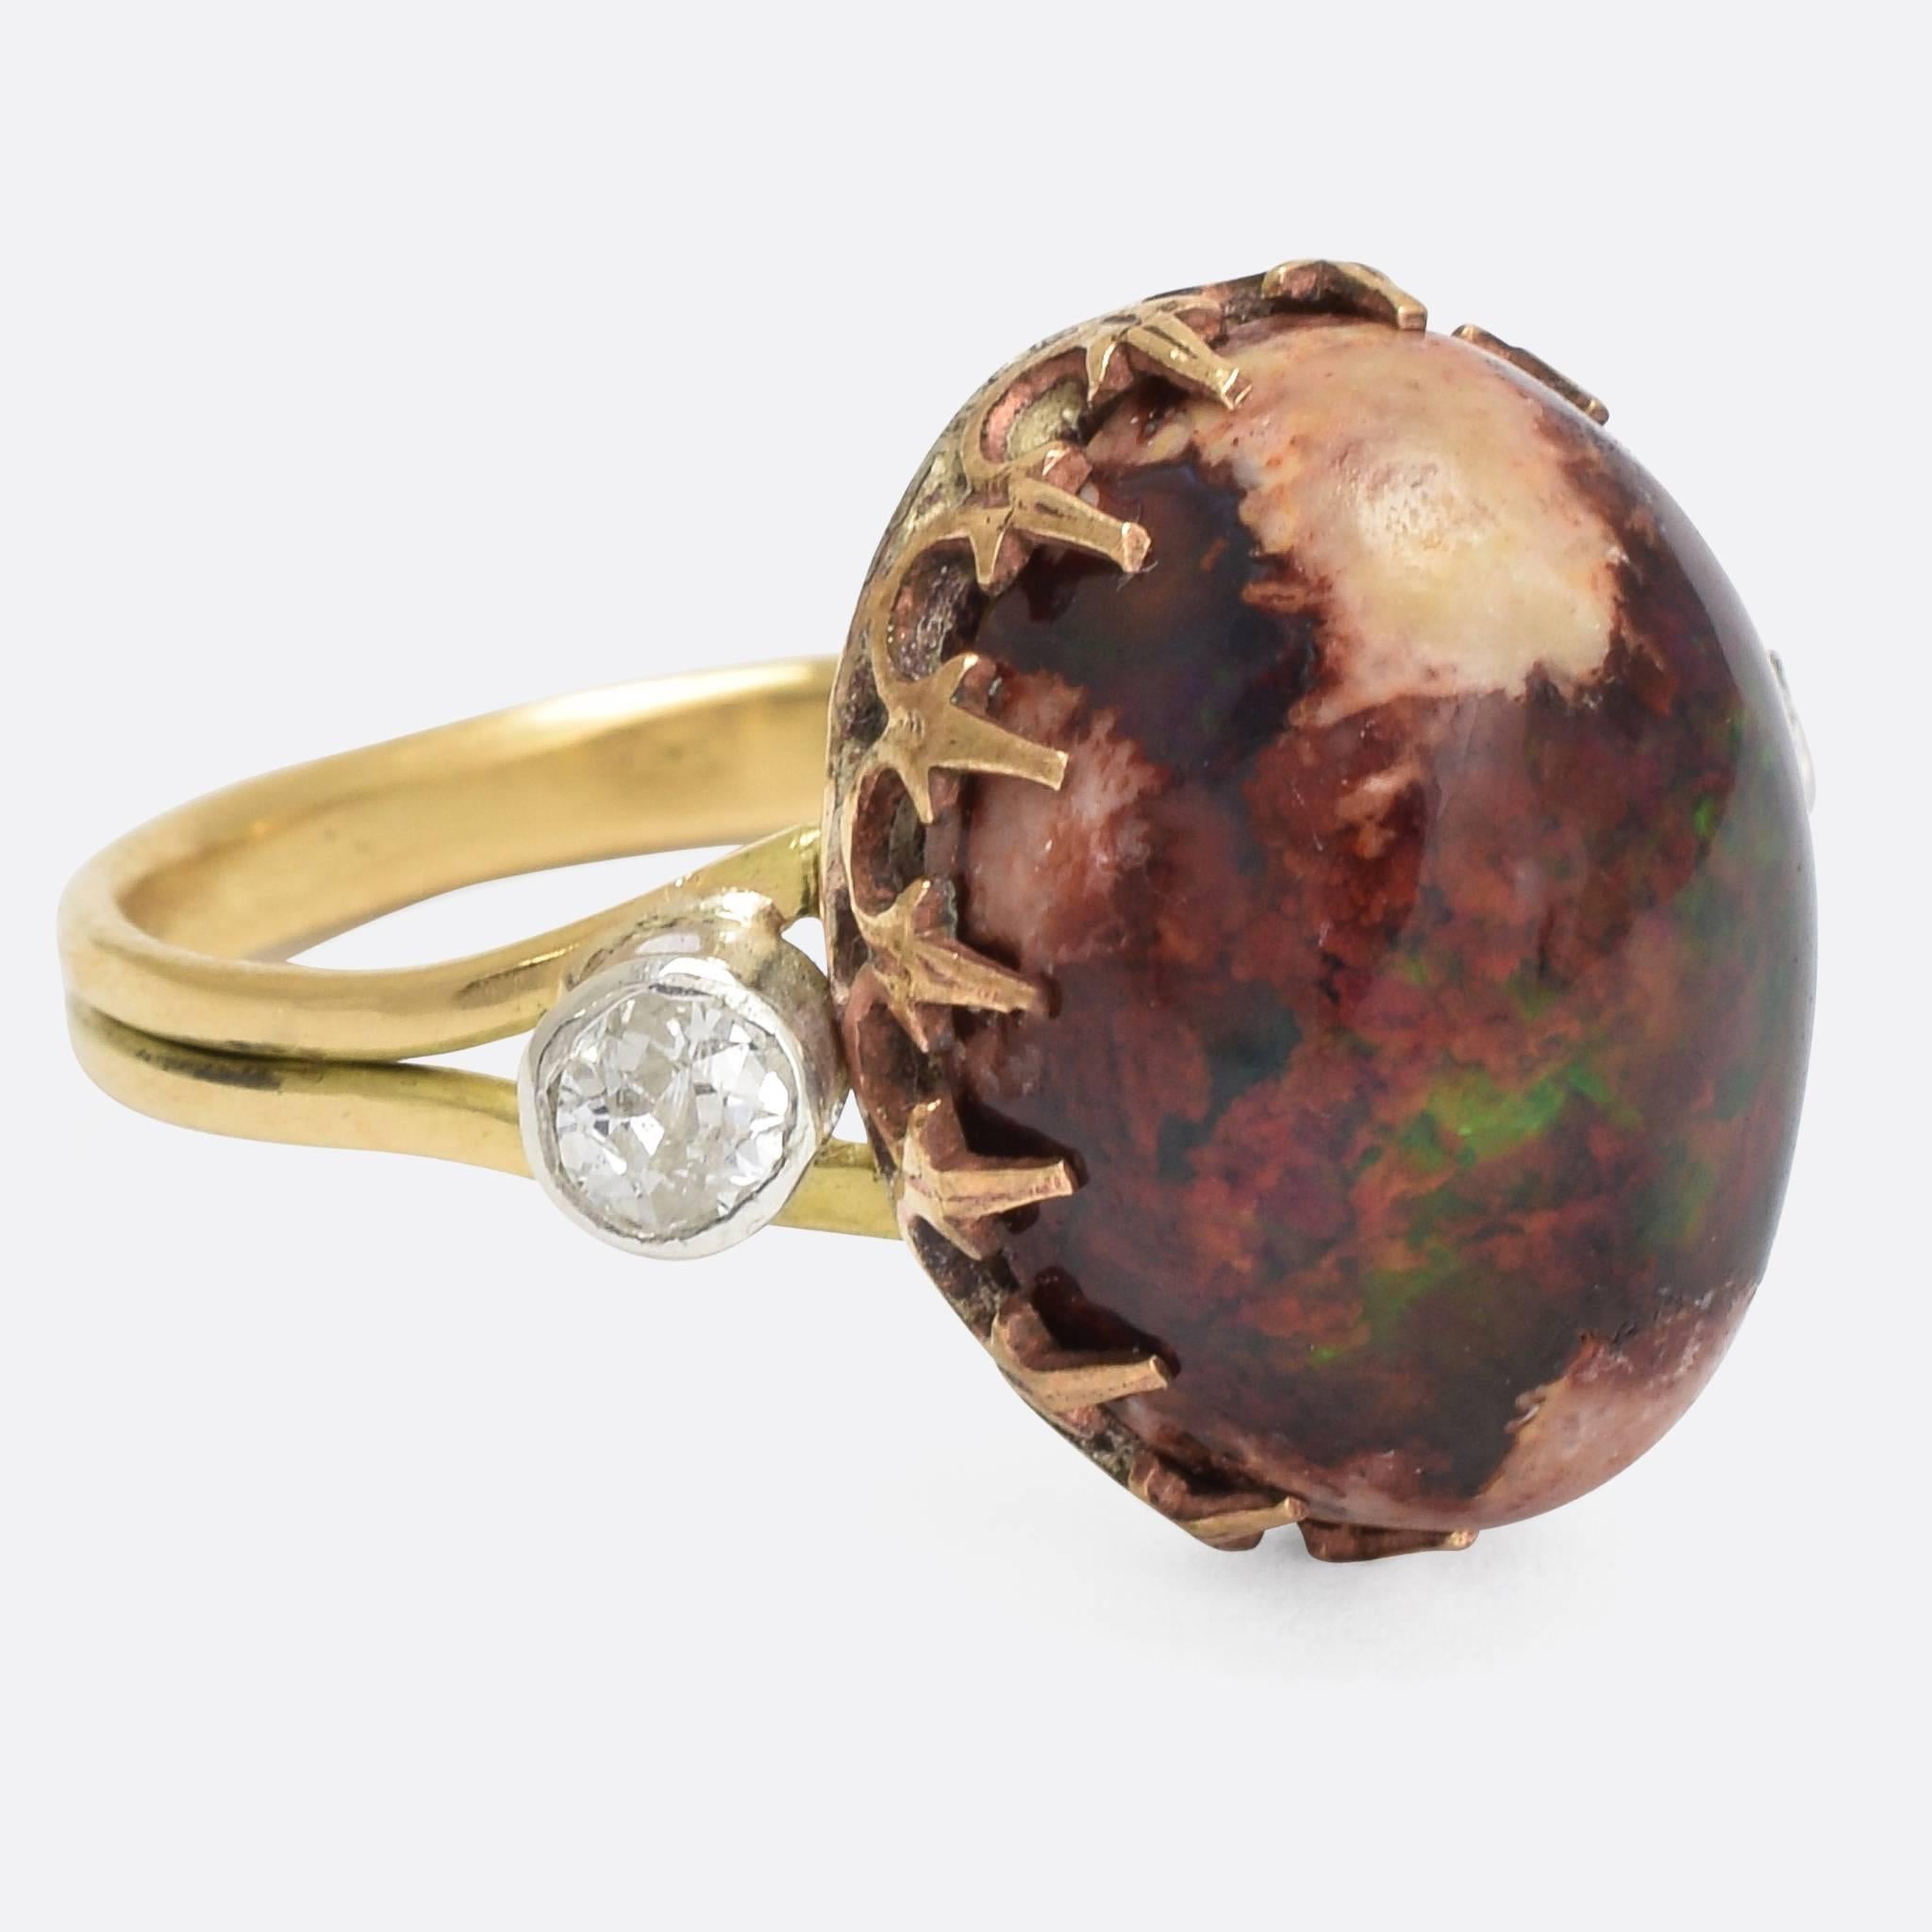 A stunning boulder opal is flanked by two old mine cut diamonds, in a highly attractive vintage ring mount modelled in 18ct gold throughout, the diamonds are intricately set in white gold collet settings, the band is reeded and tapers slightly from